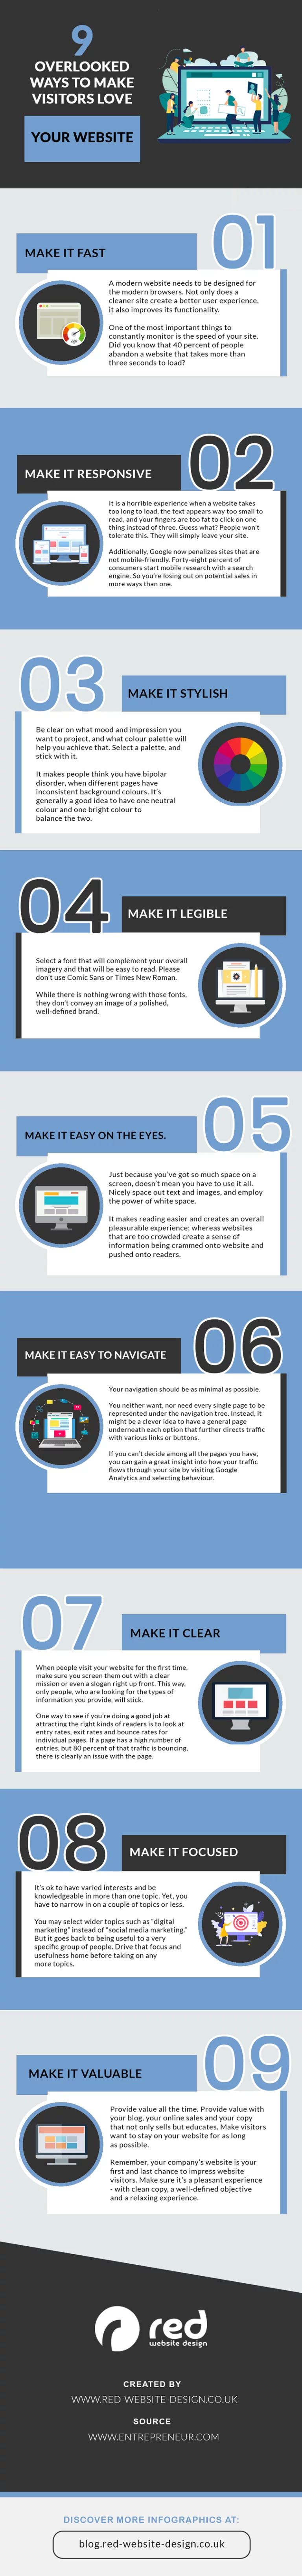 9 often overlooked ways to make visitors and google love your website infographic